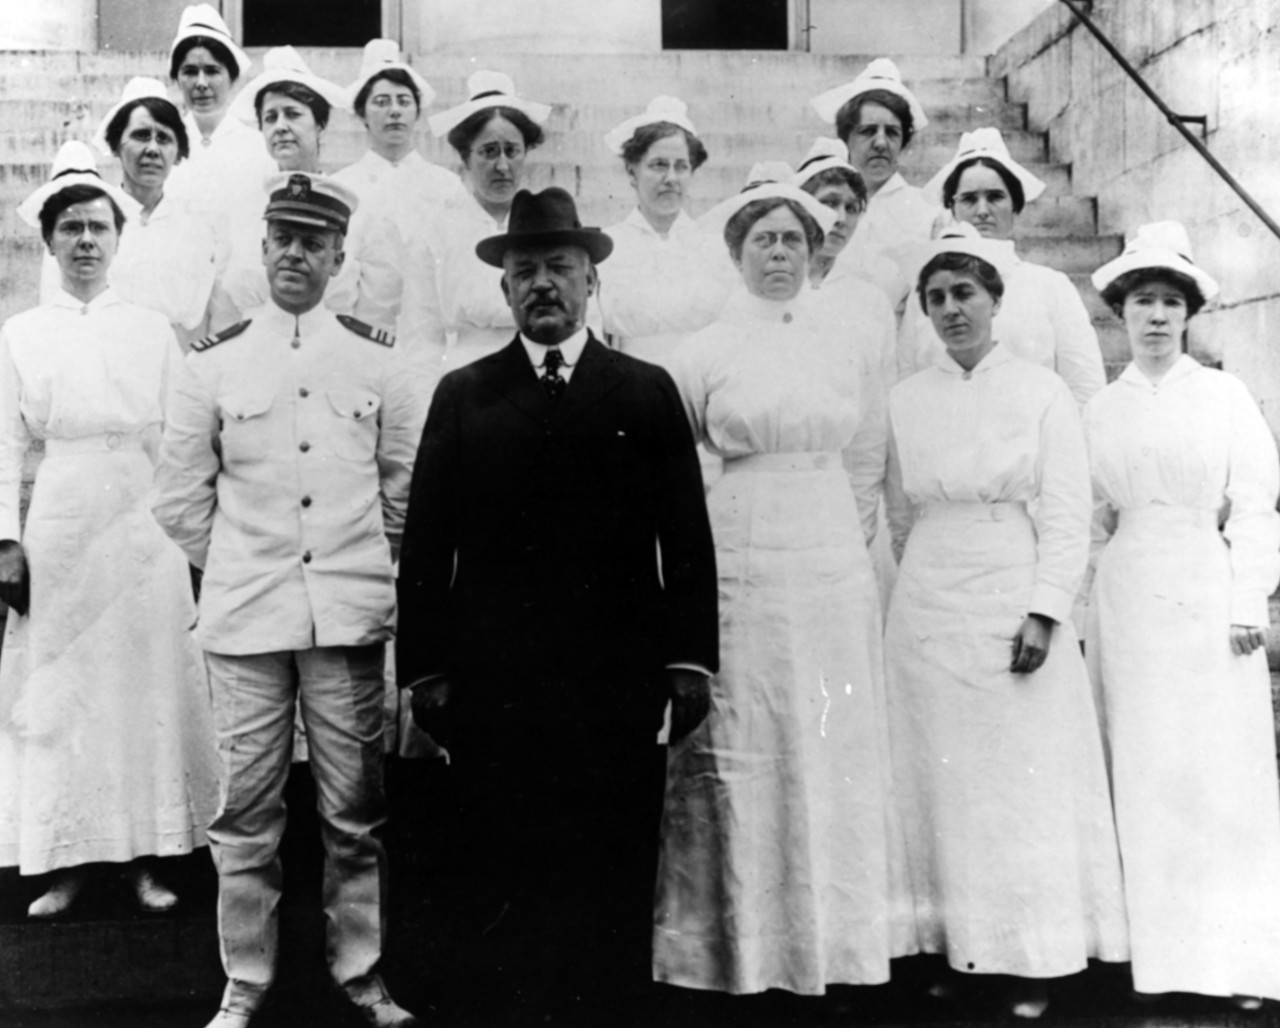 Group of nurses stand on the steps of a building in their white uniform with a male officer and civilian in front.